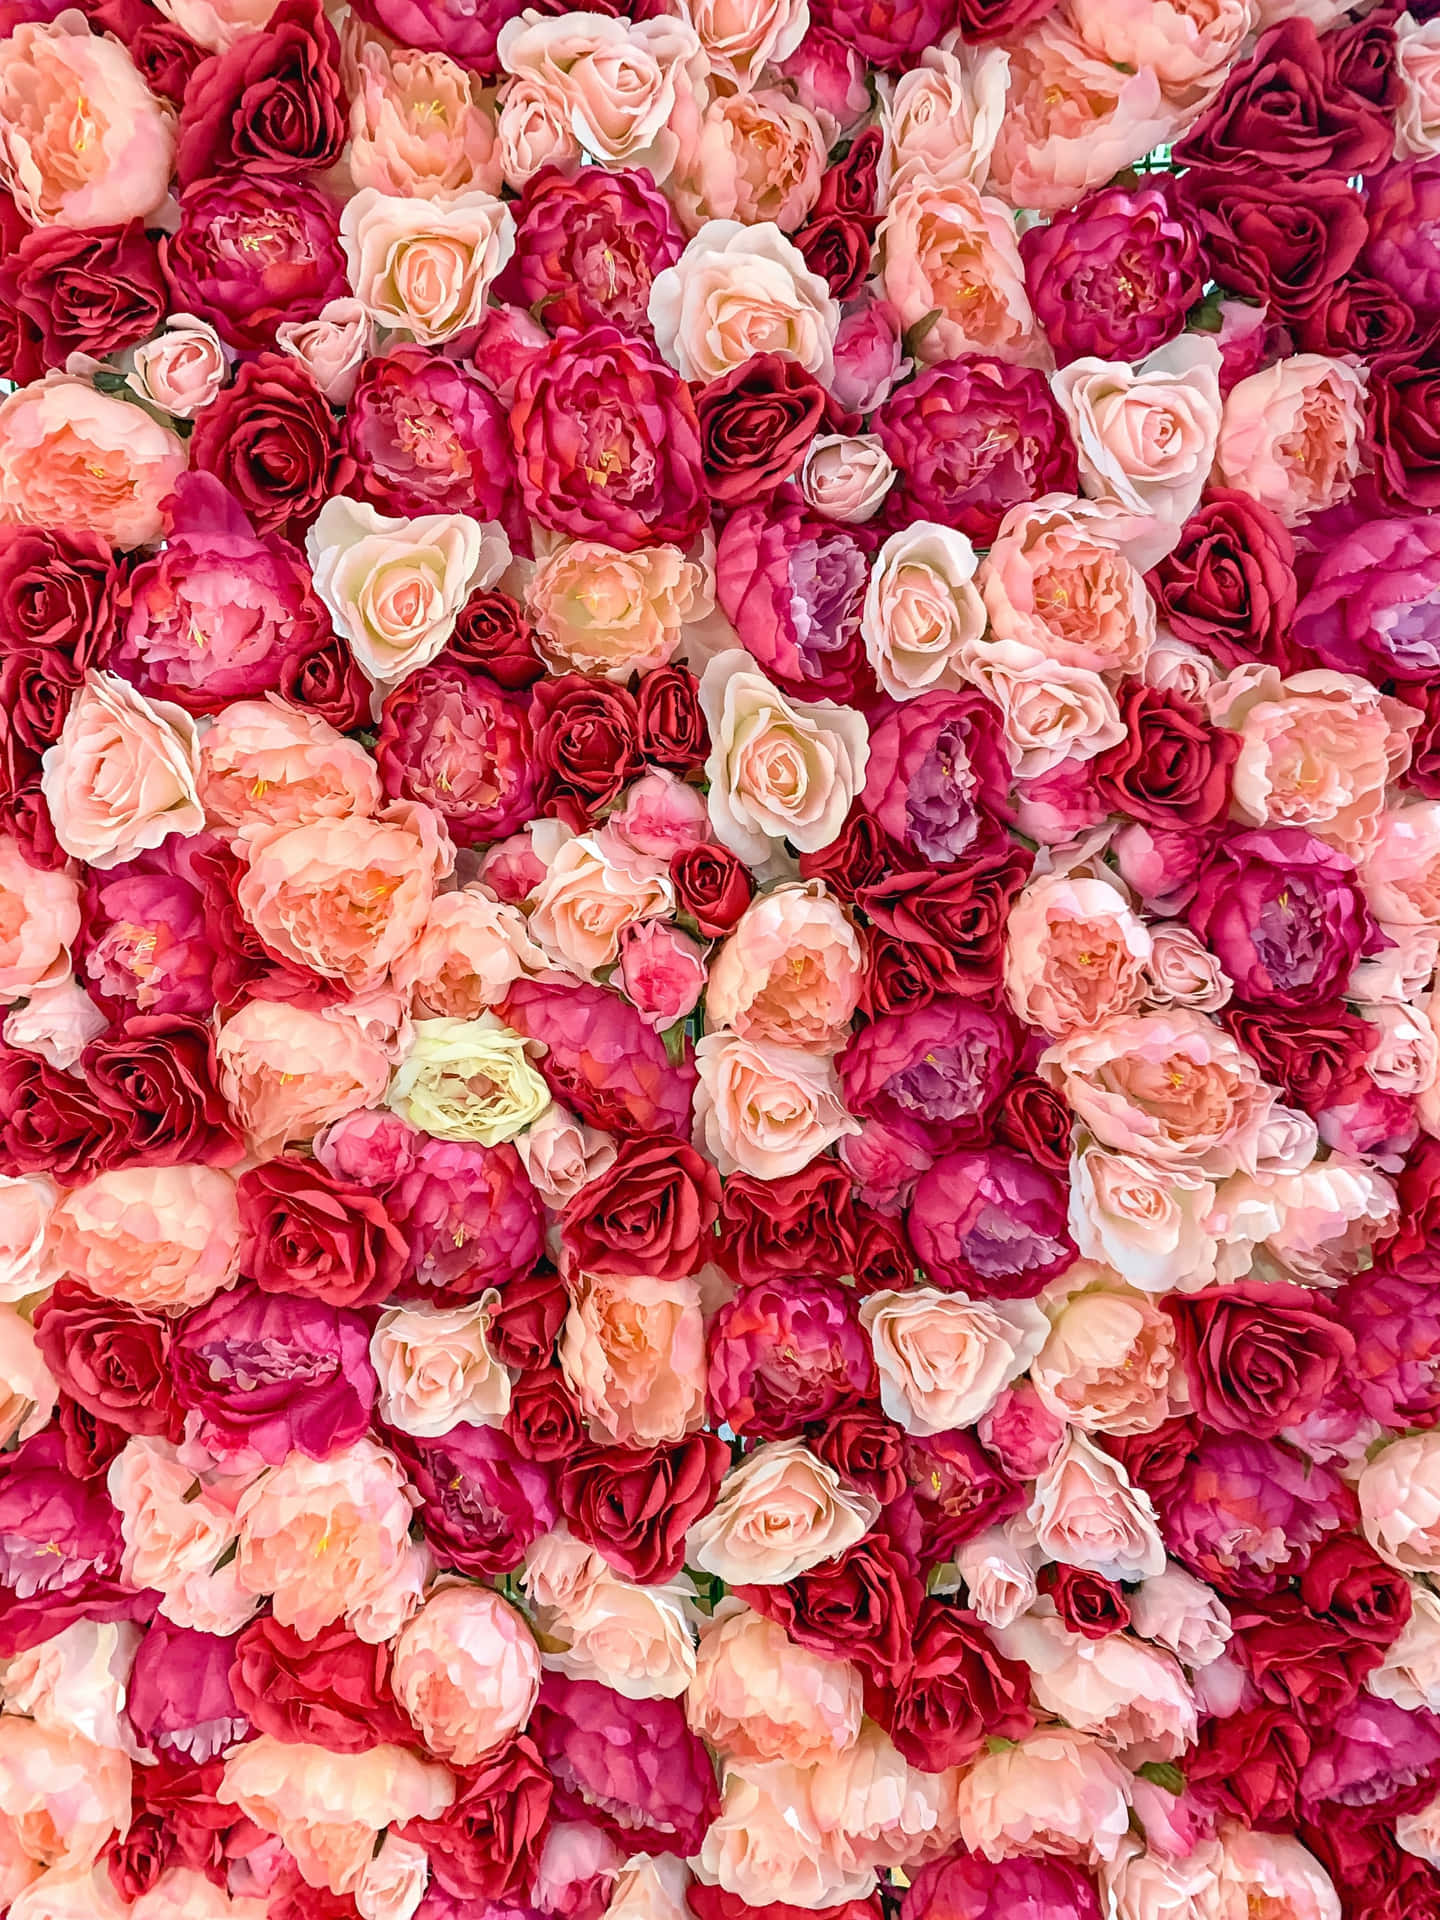 Scenic Spectrum Of Roses - A Mesmerizing Array